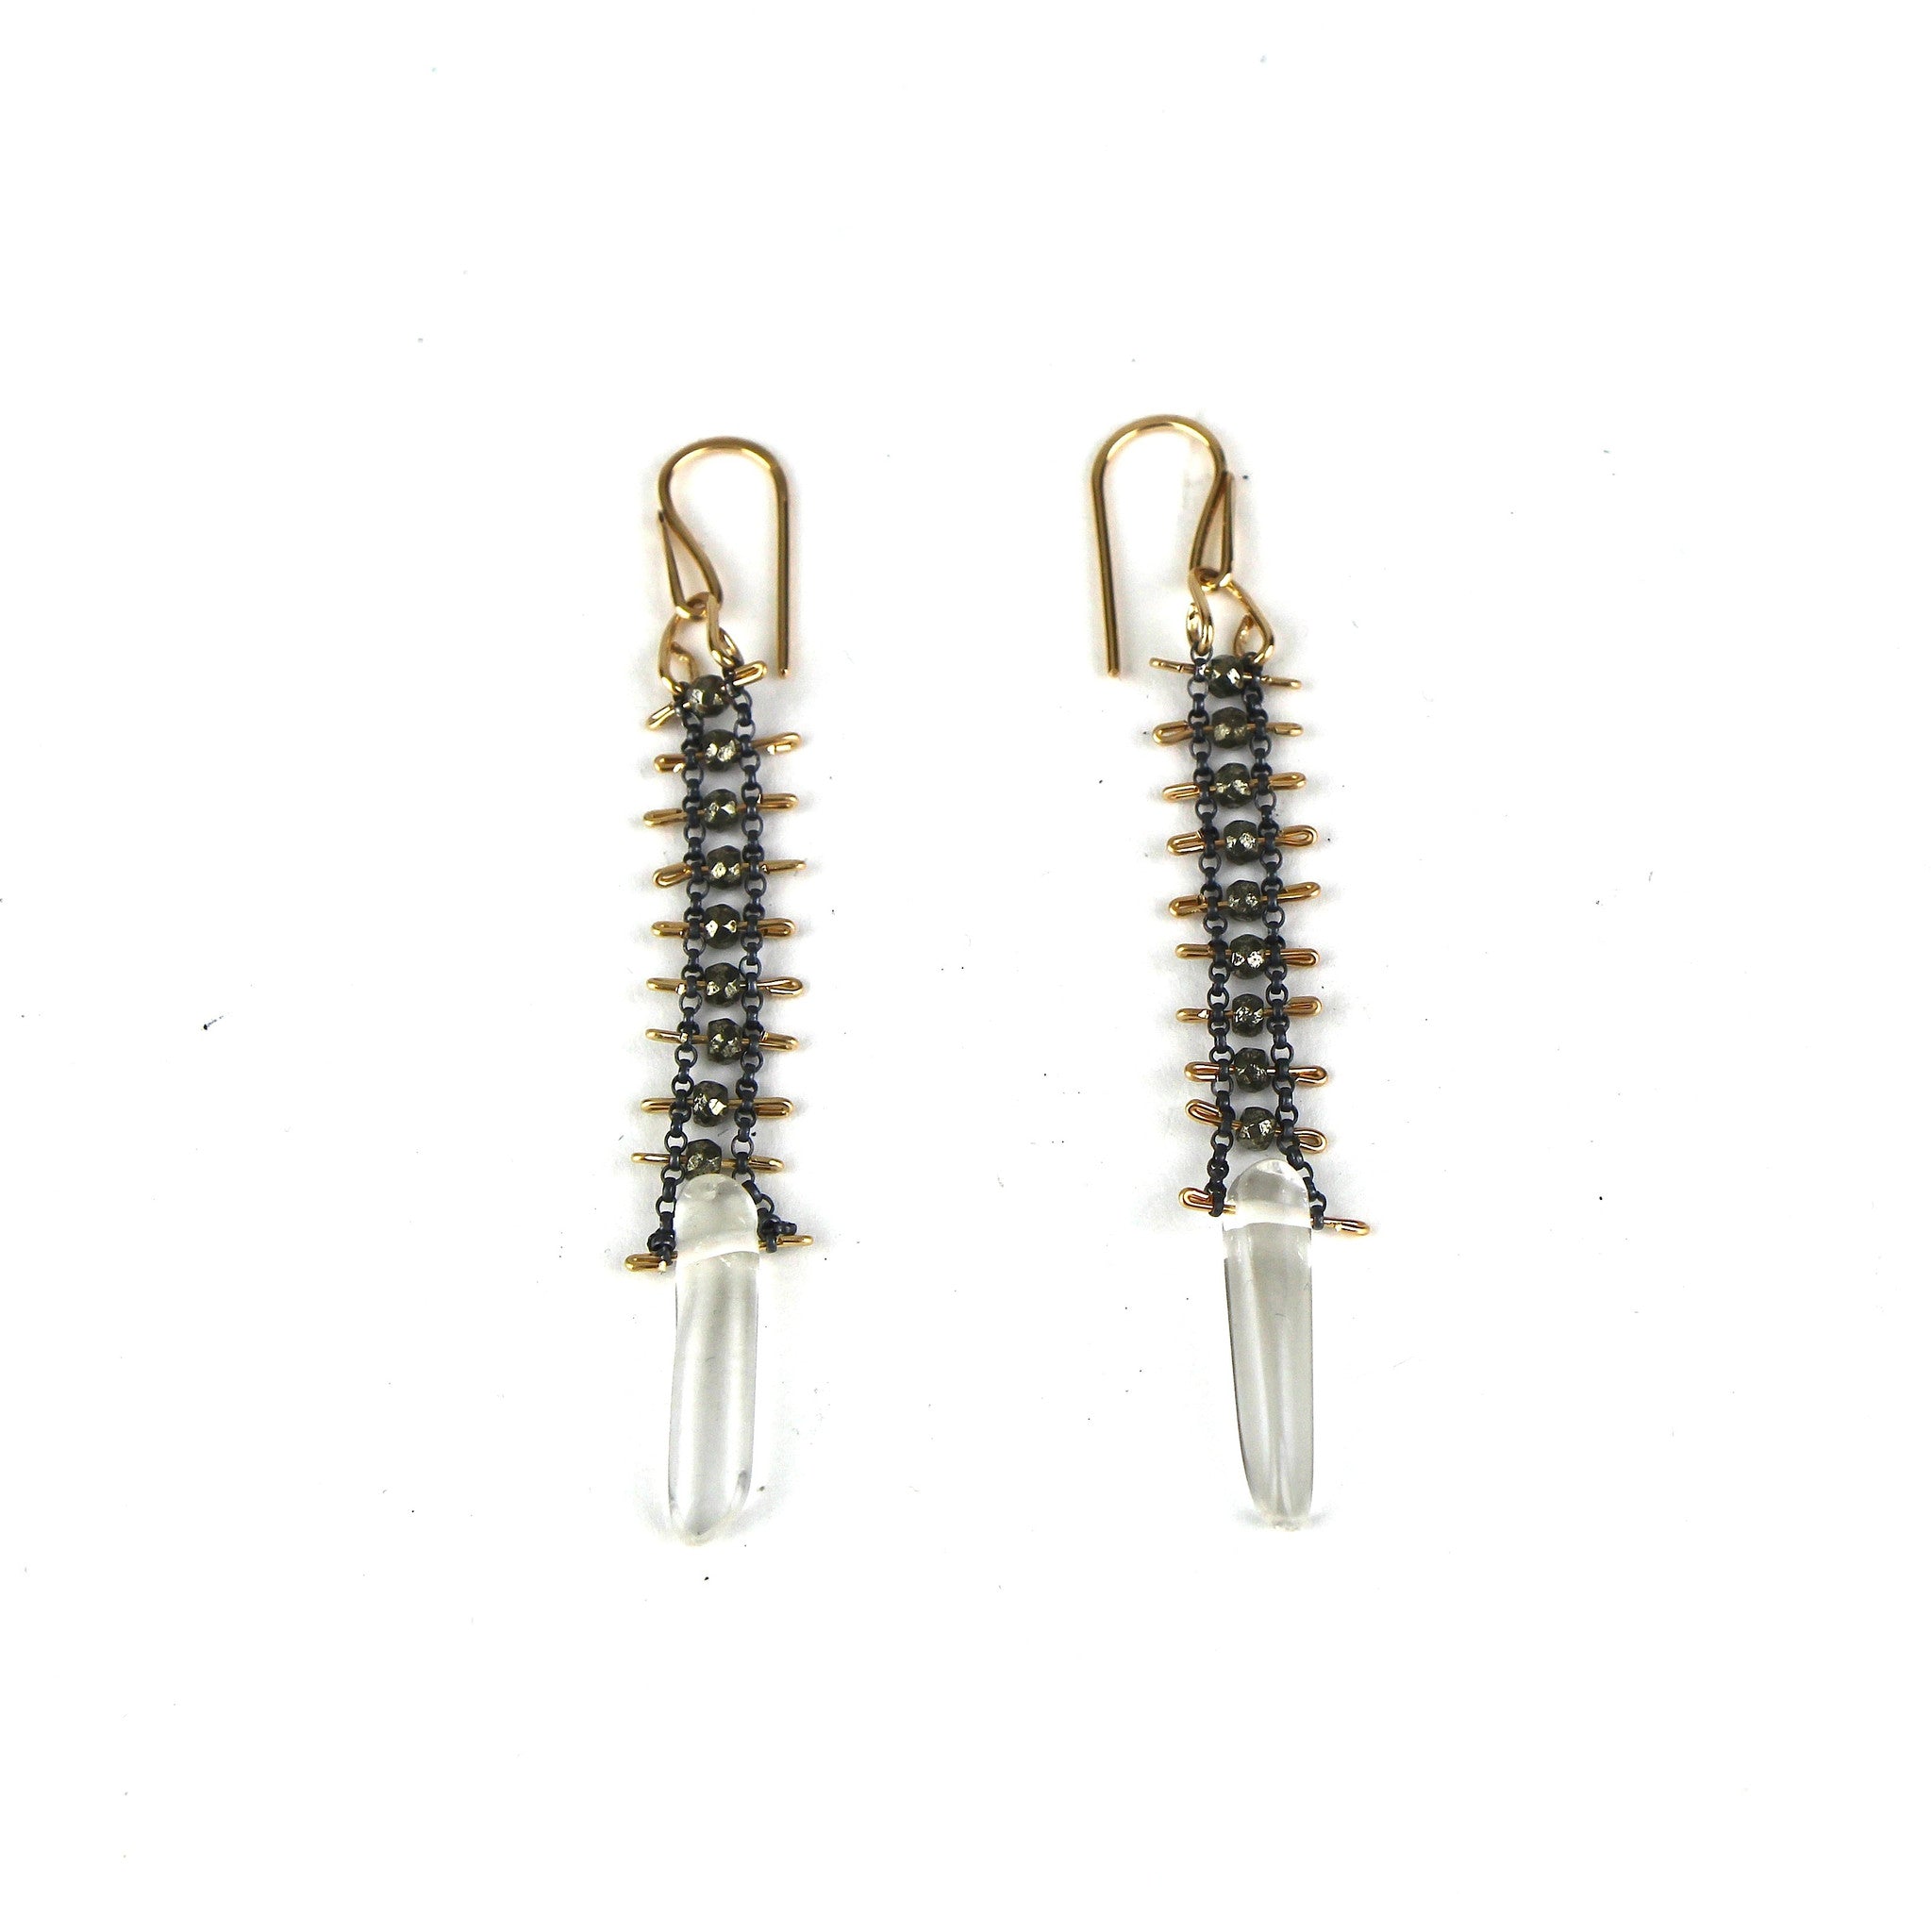 Pyrite and Crystal Earrings in Oxidized Silver